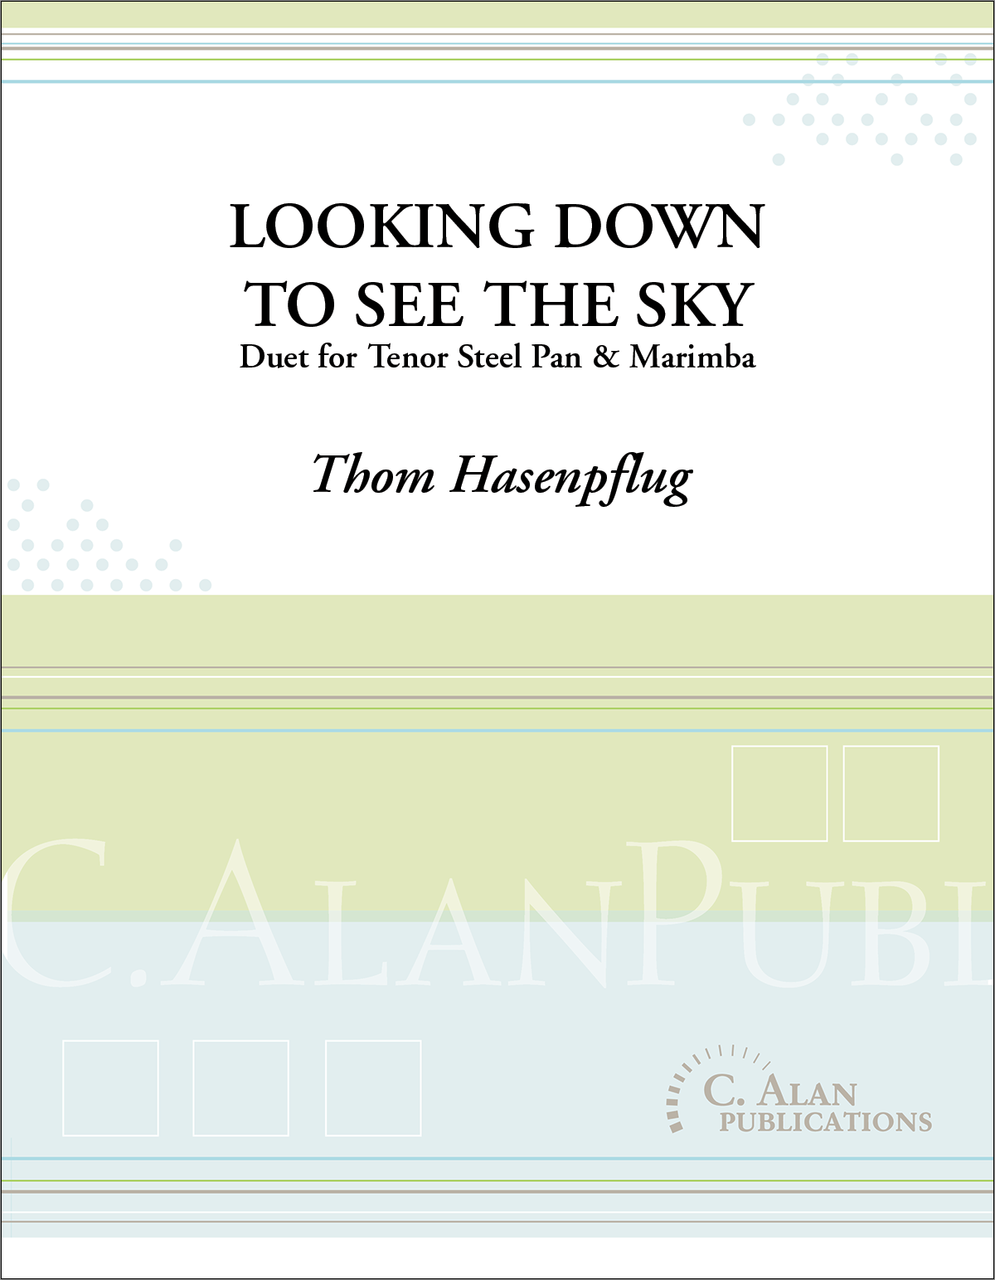 Looking down to see the sky by Thom Hasenpflug